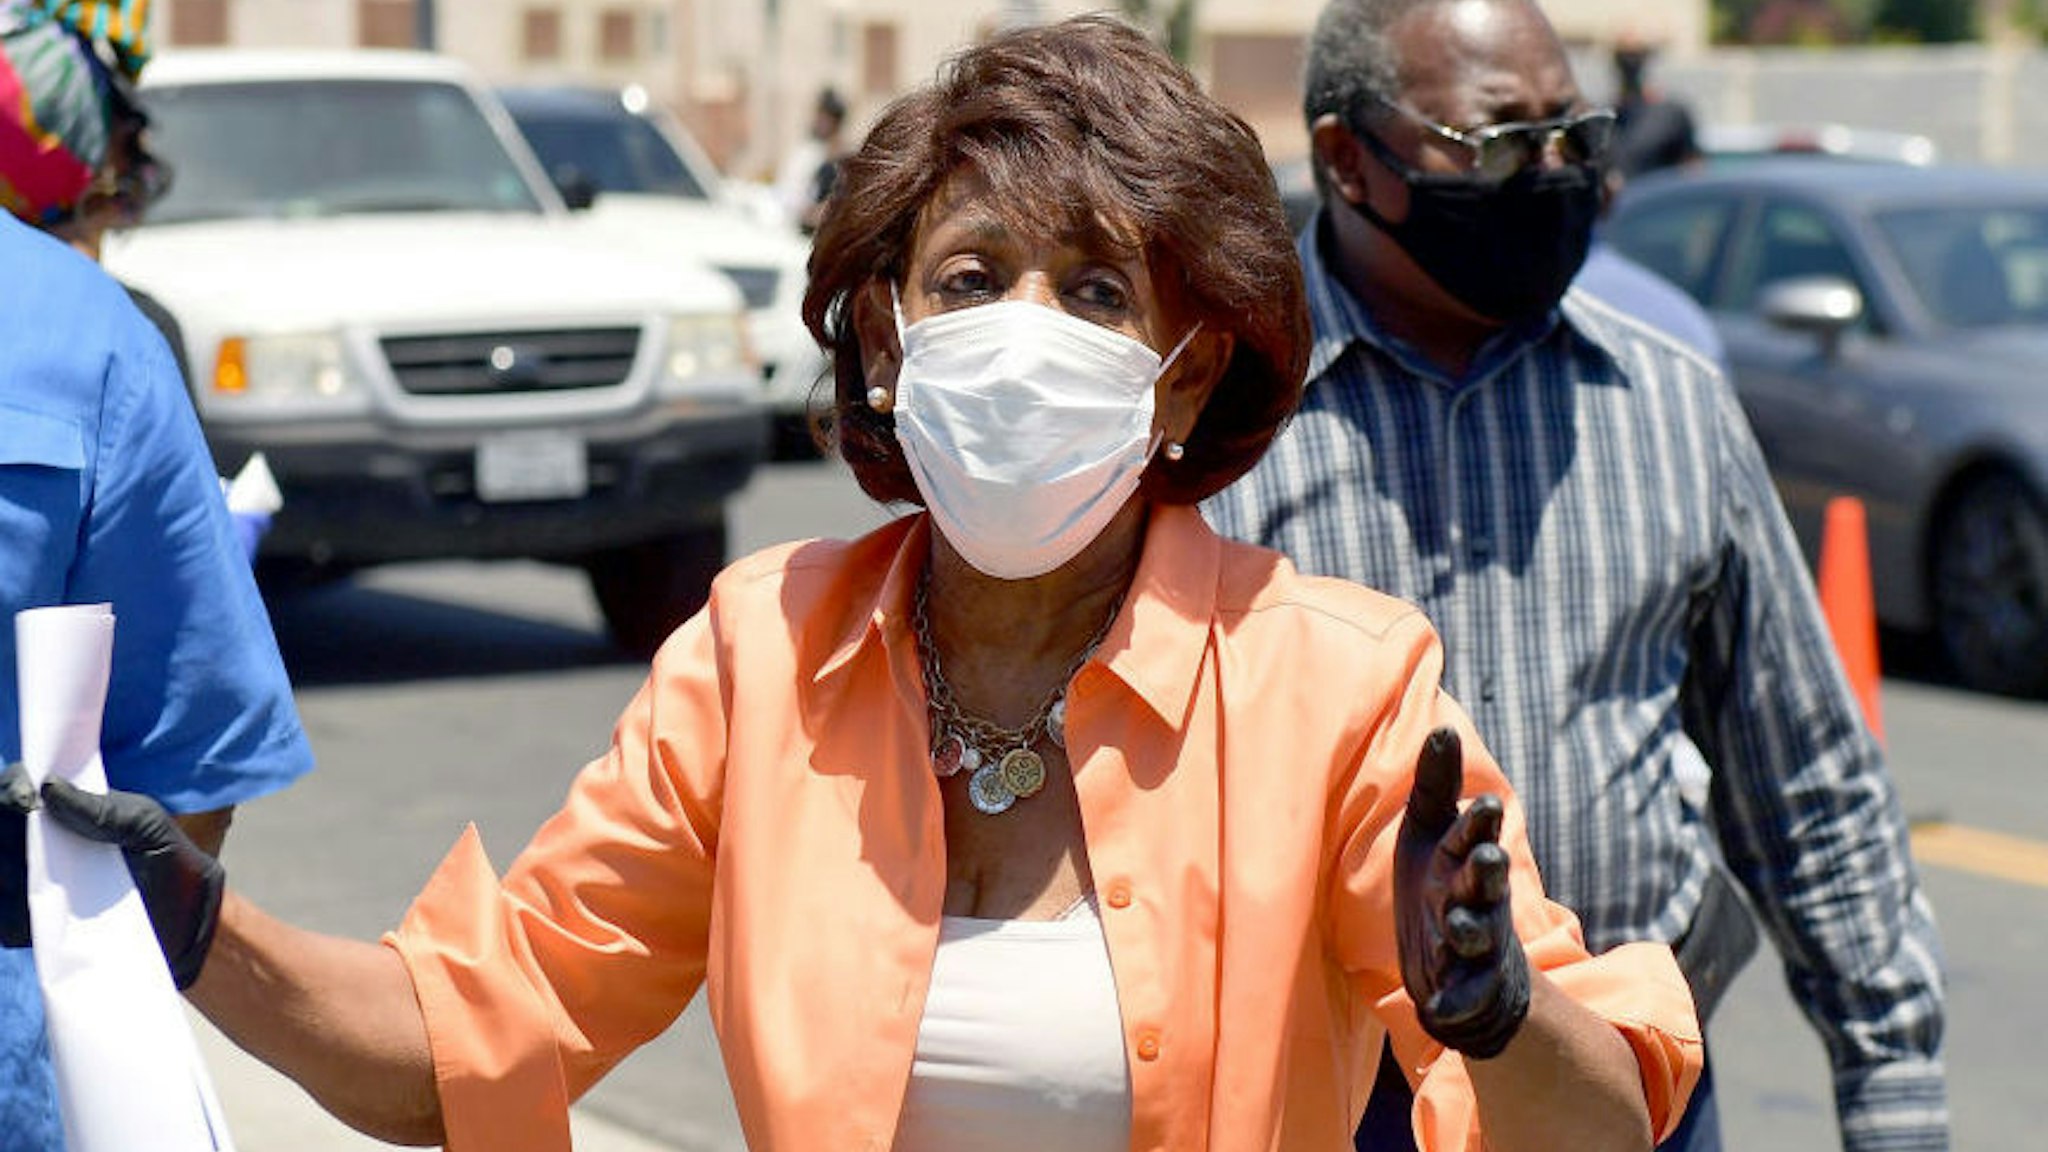 Congresswoman Maxine Waters attends the #WONDALUNCH Fresh Produce and Poultry Drive Thru Giveaway on July 07, 2020 in Watts, California.